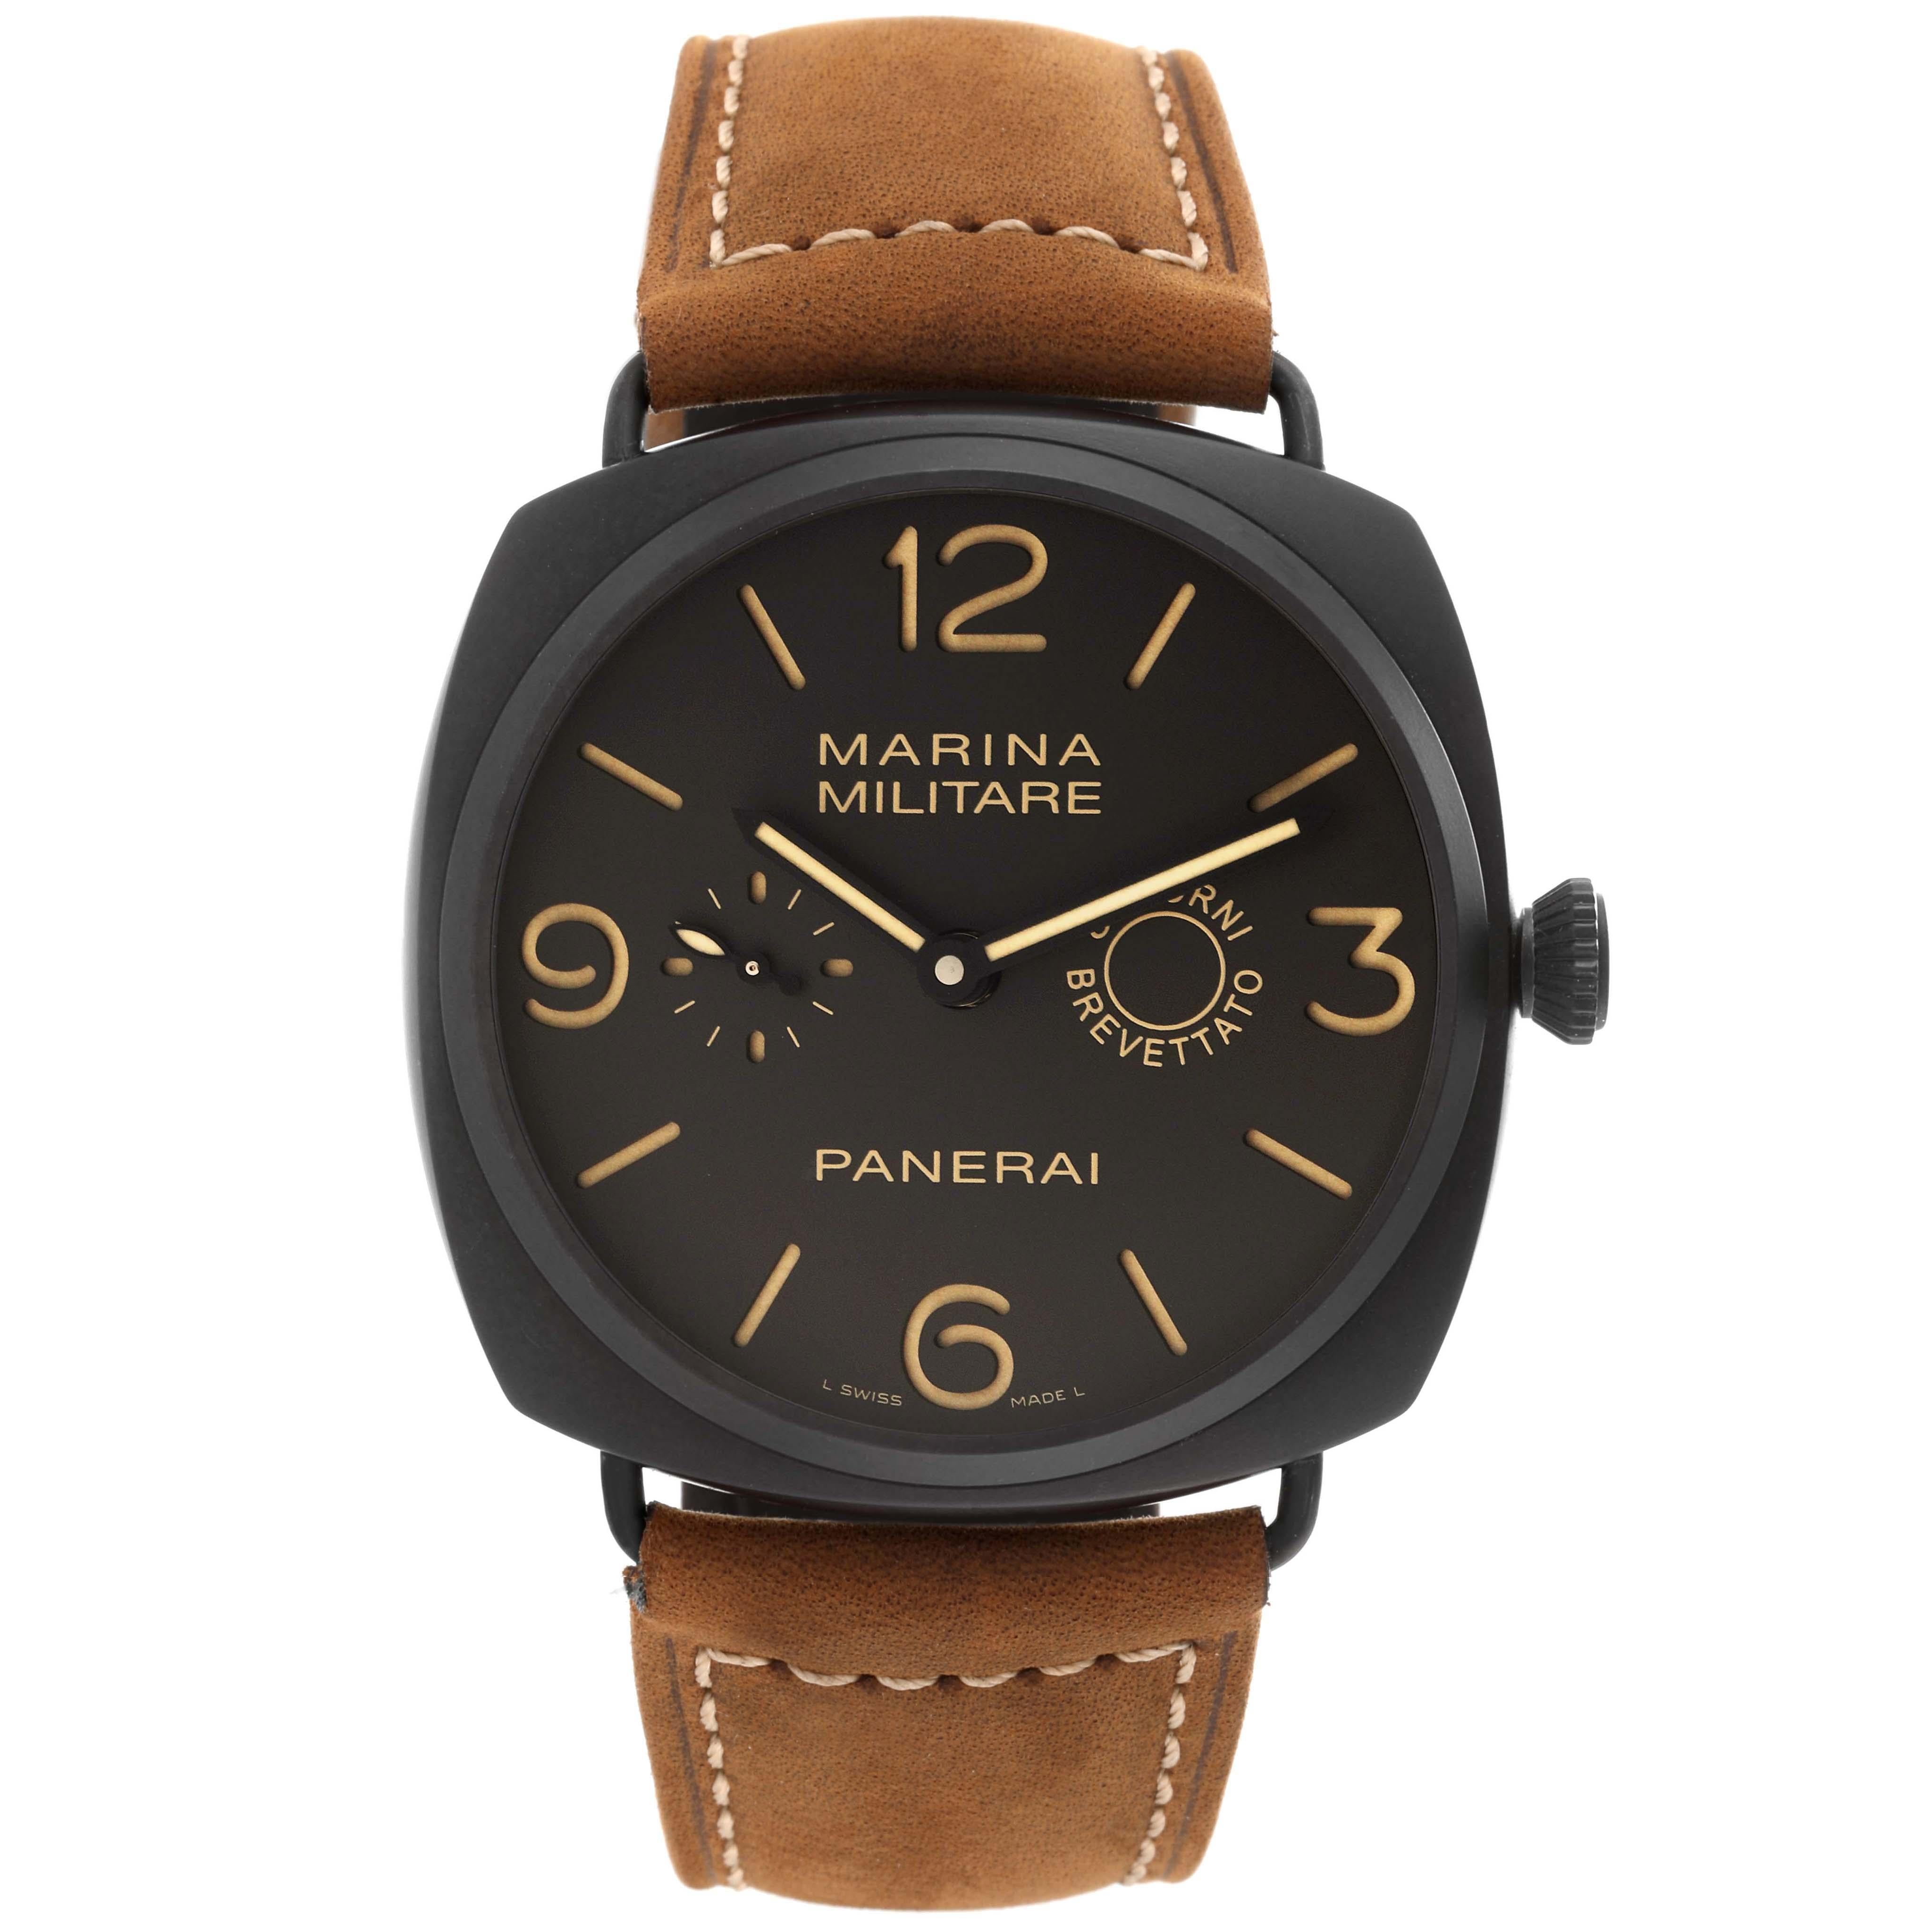 Panerai Radiomir Composite Marina Militare 8 Mens Watch PAM00339 Box Papers. Manual-winding movement. Cushion shaped composite case 47.0 mm in diameter. Black composite sloped bezel. Scratch resistant sapphire crystal. Millitary brown dial with